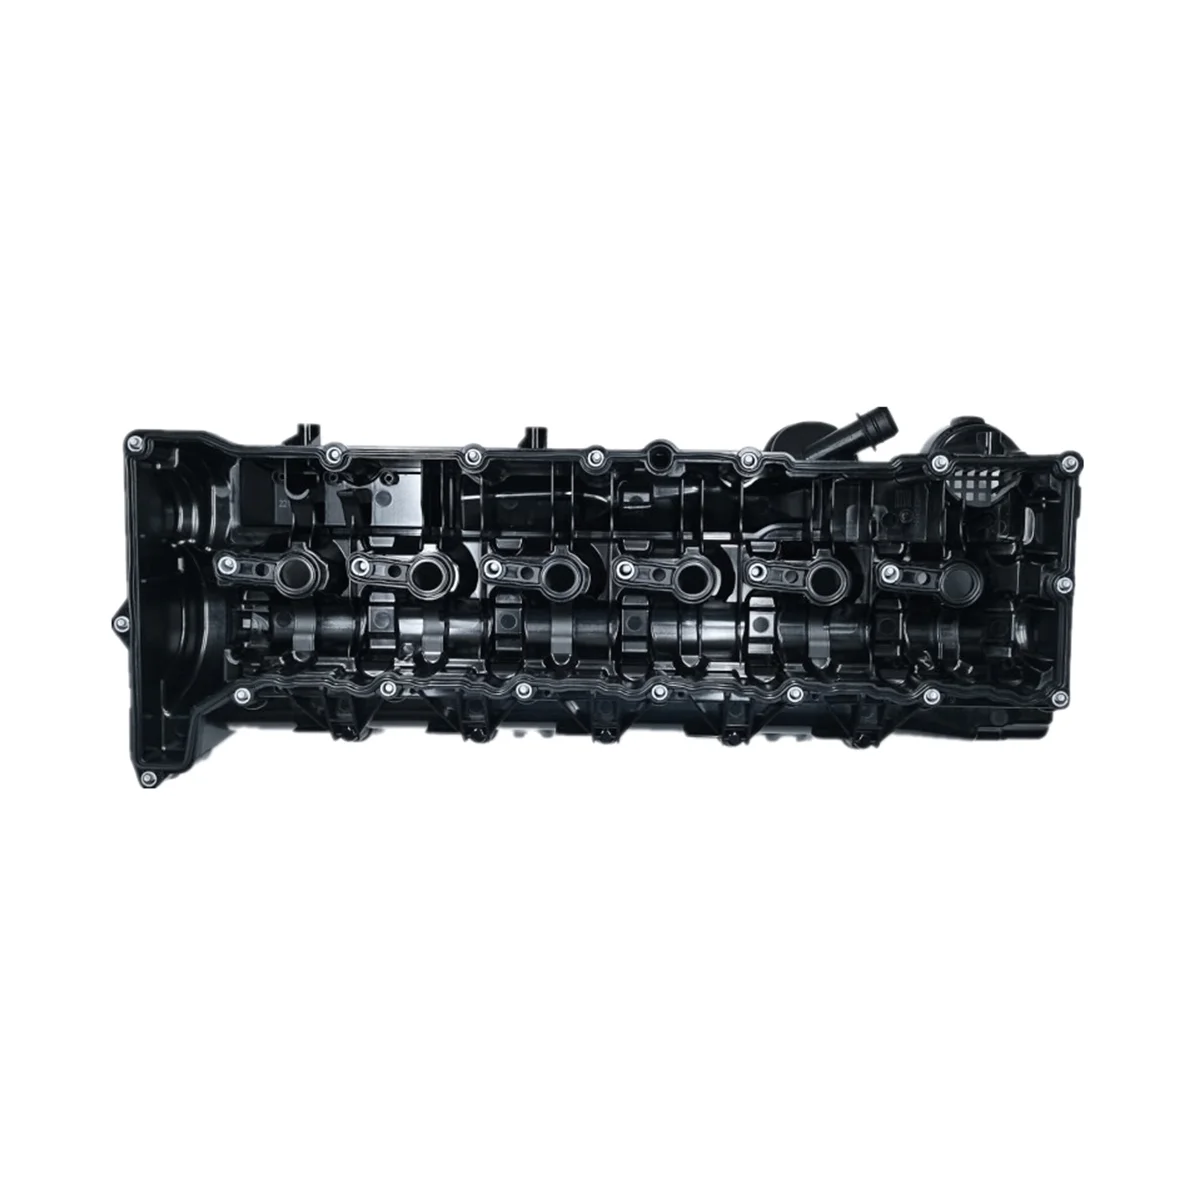 

Valve Chamber Cover Assy Engine Cylinder Head for BMW X3 X5 X6 E70 E71 E90 E91 E92 E93 F25 F26 F01 F02 F31 11128515745